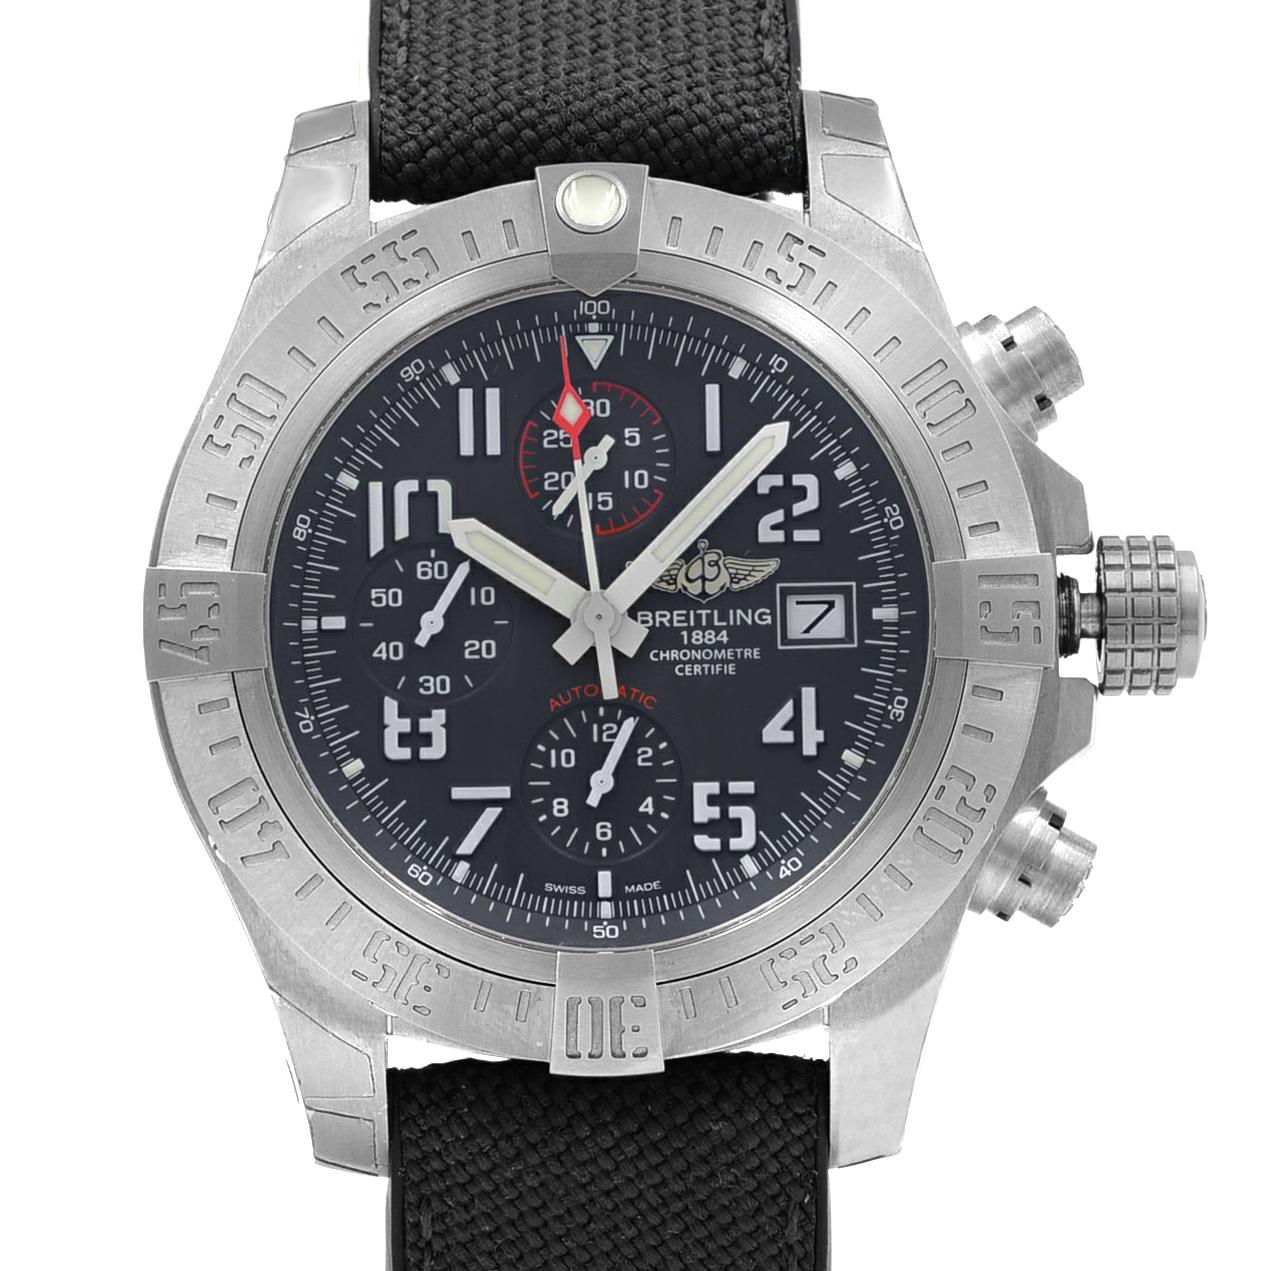 This display model Breitling Avenger E1338310/M536-253S is a beautiful men's timepiece that is powered by mechanical (automatic) movement which is cased in a titanium case. It has a round shape face, chronograph, date indicator, small seconds